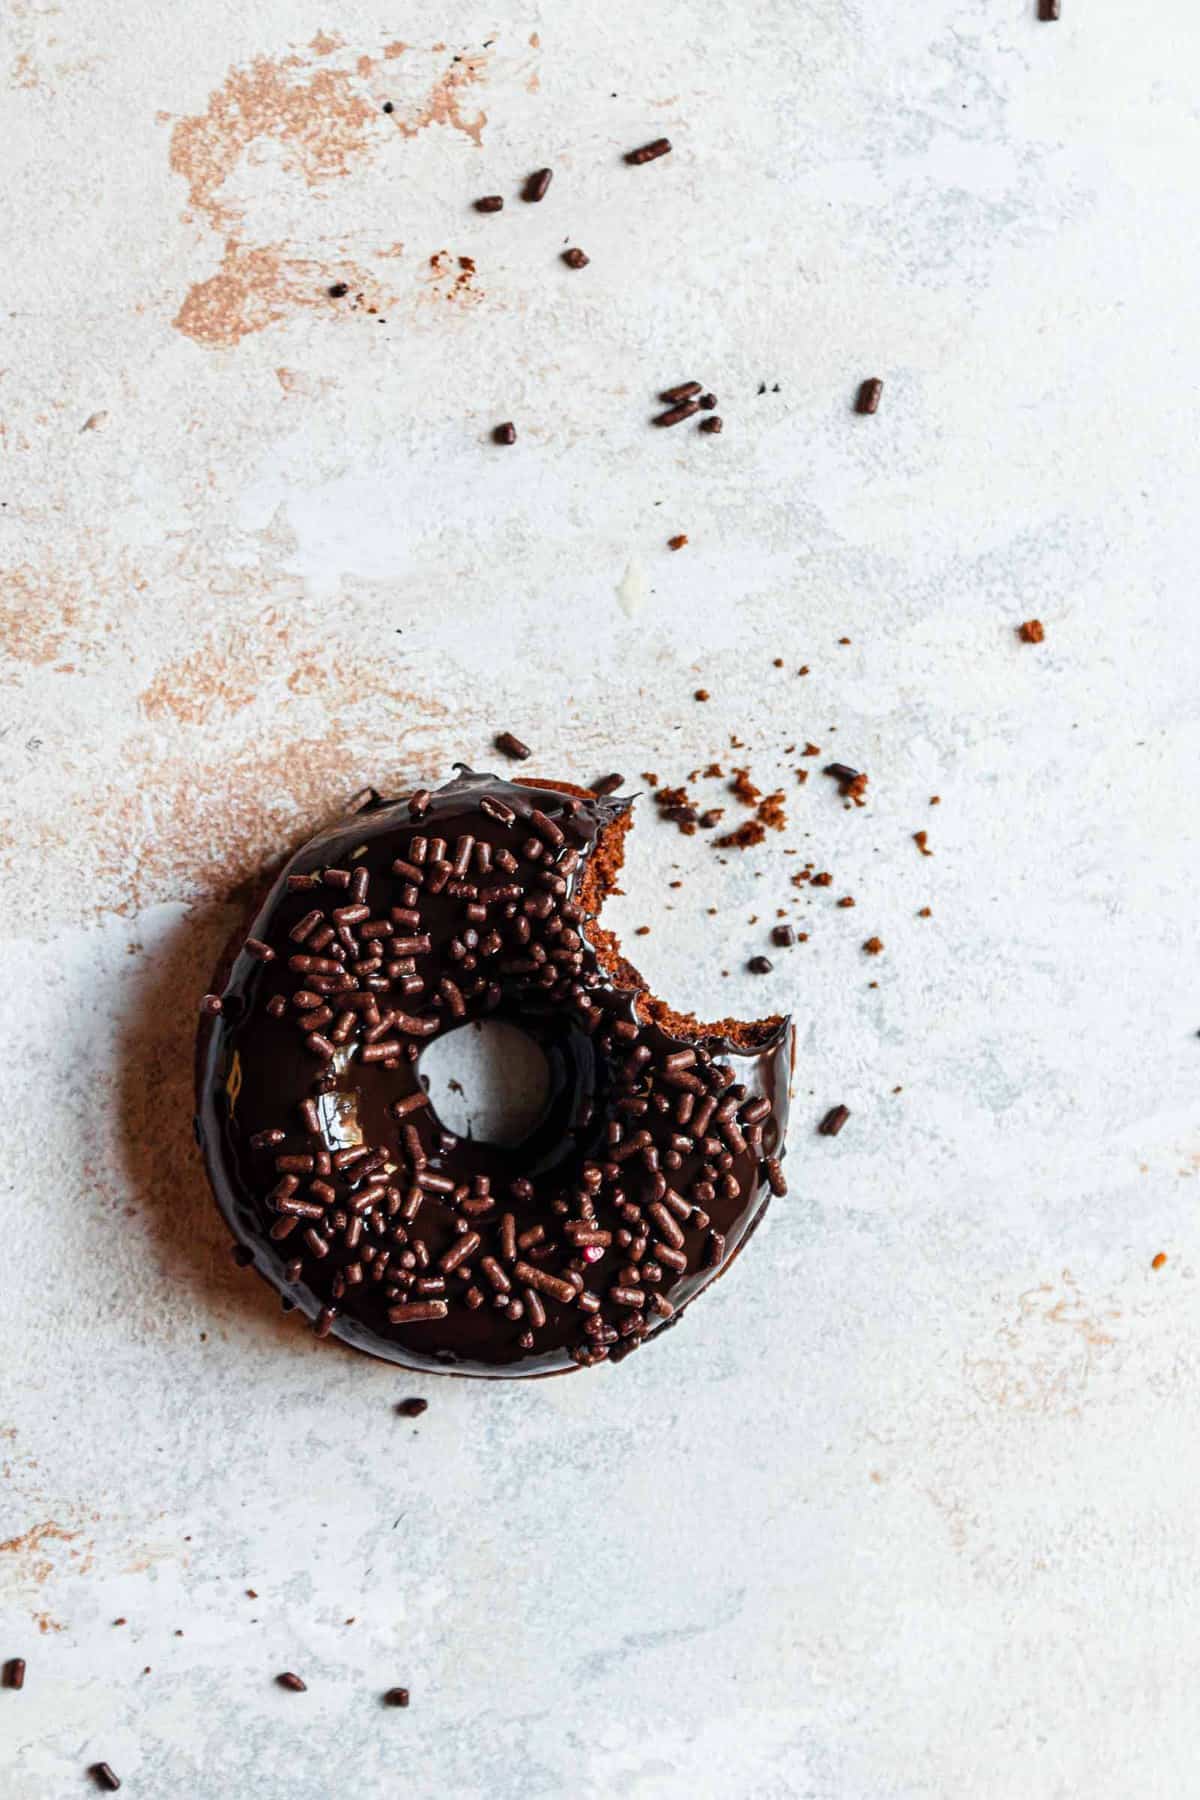 baked chocolate donuts recipe